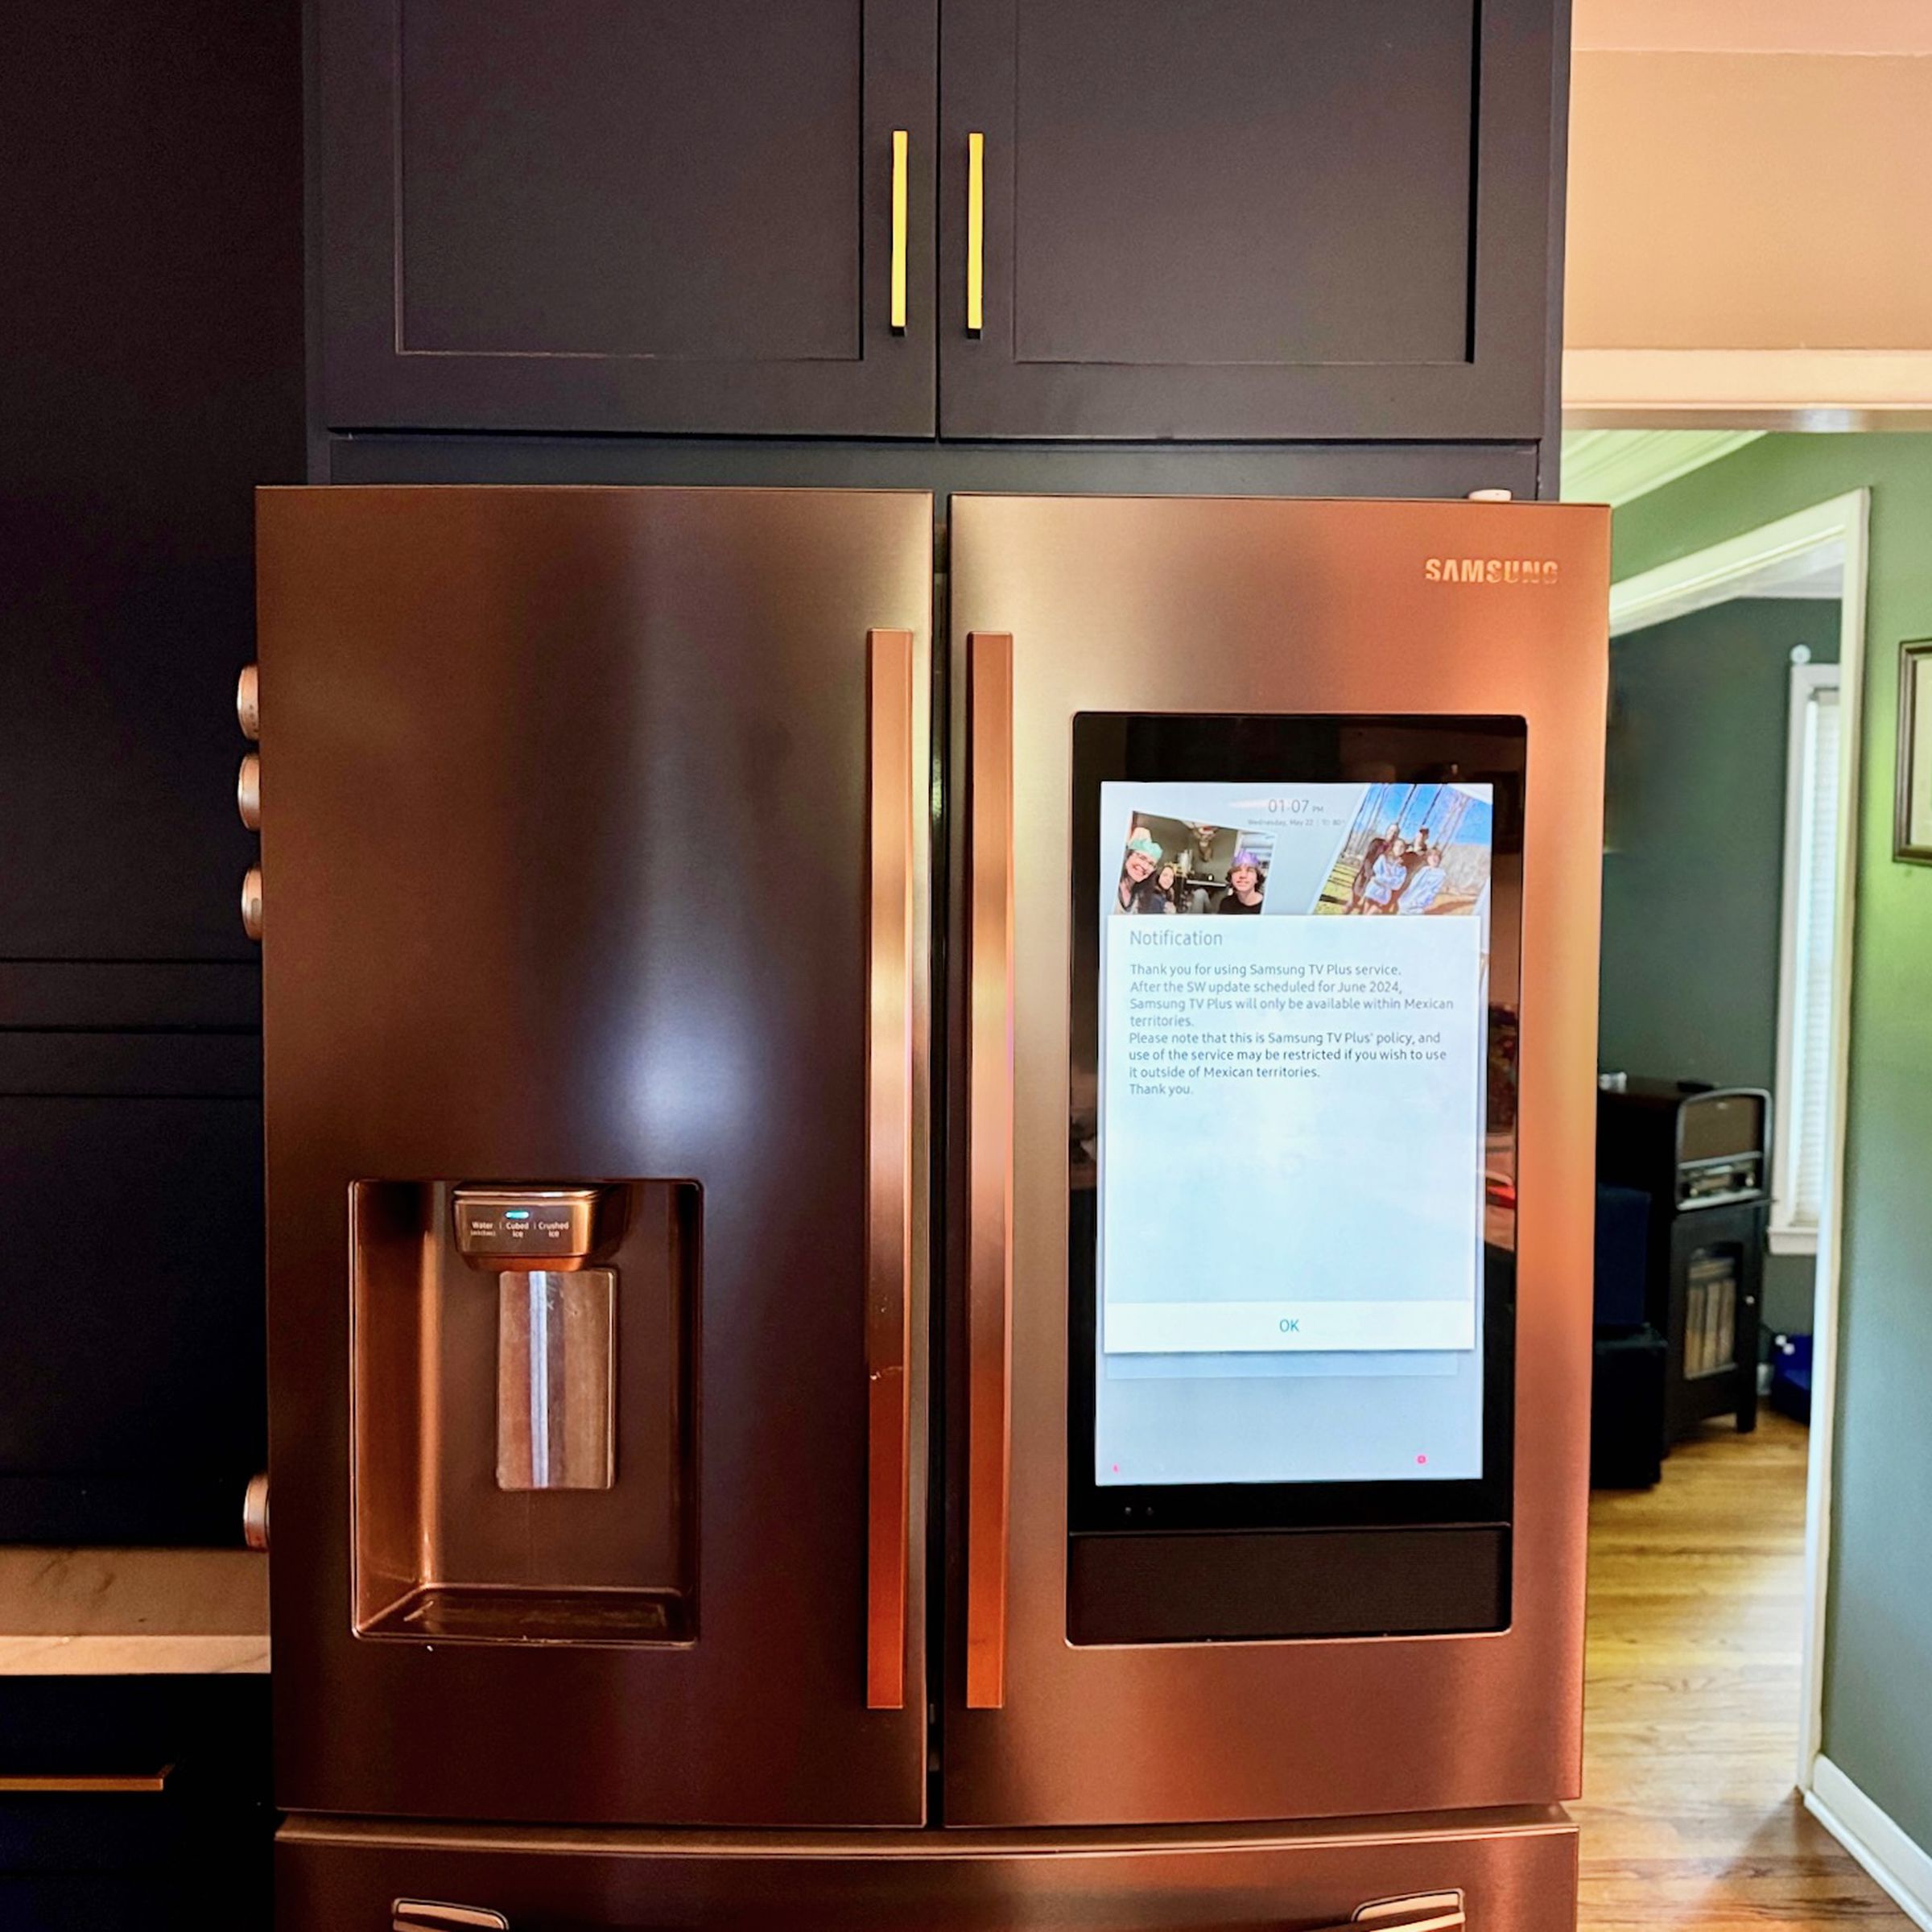 A fridge with a tablet screen in a kitchen.